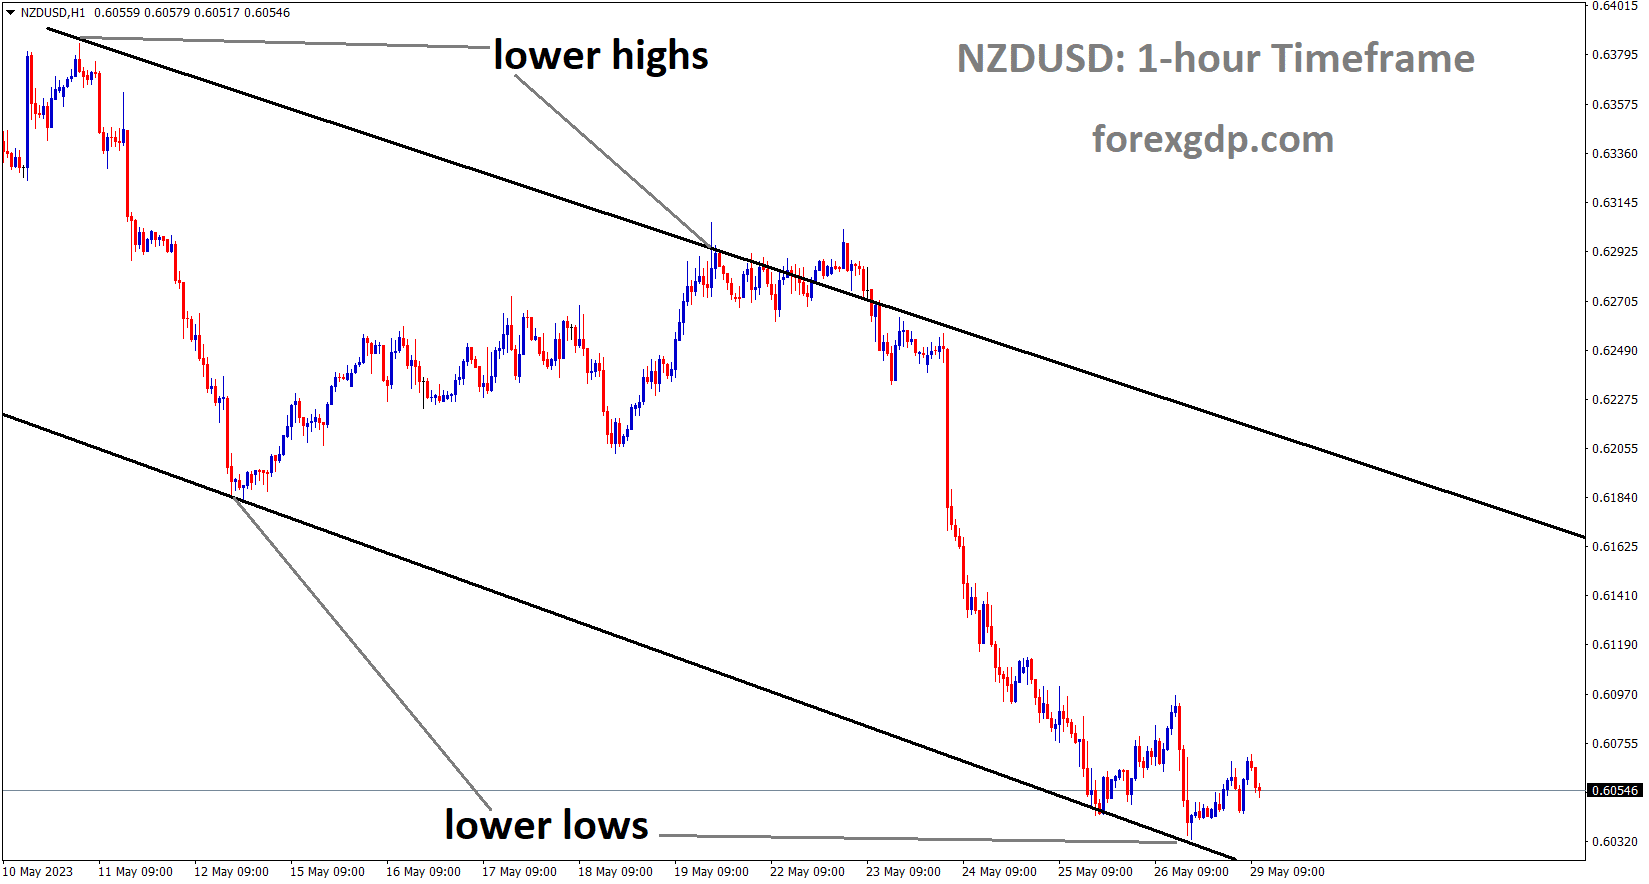 NZDUSD is moving in the Descending Channel and the market has reached the lower low area of the channel